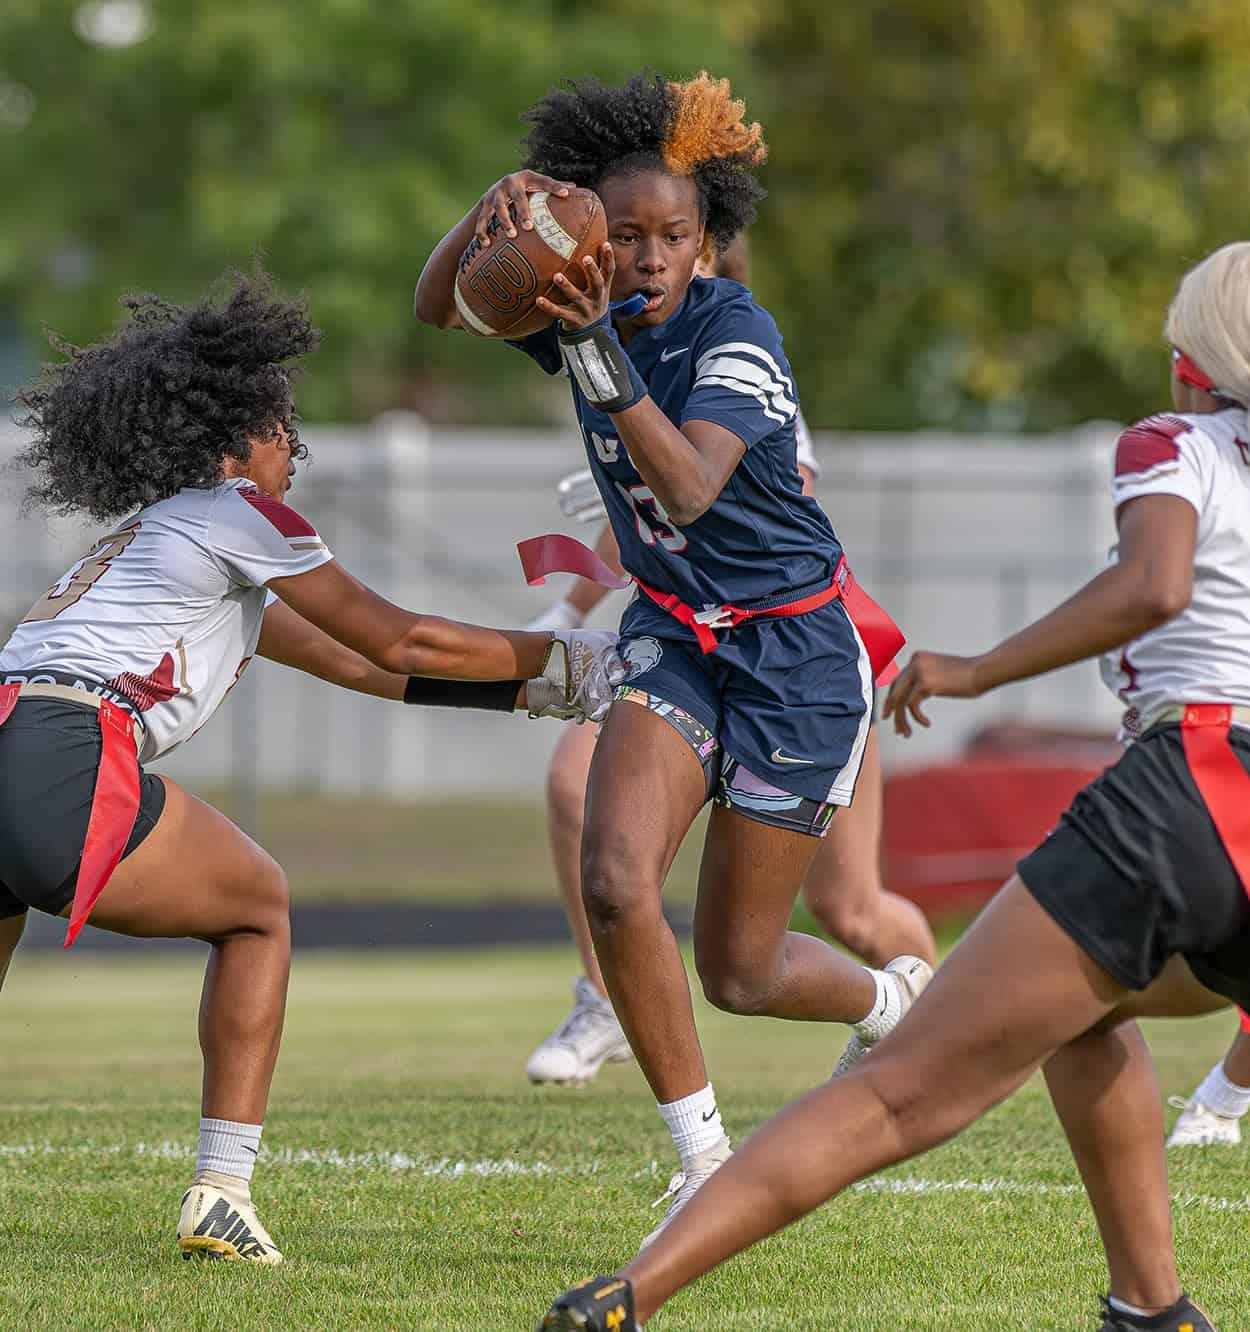 Springstead High, 13, J’Ziyah Munford rushes through the Countryside defense during the Eagles 36-0 win at home in the 2A District 14 playoff match. Photo by [Joseph Dicristofalo]